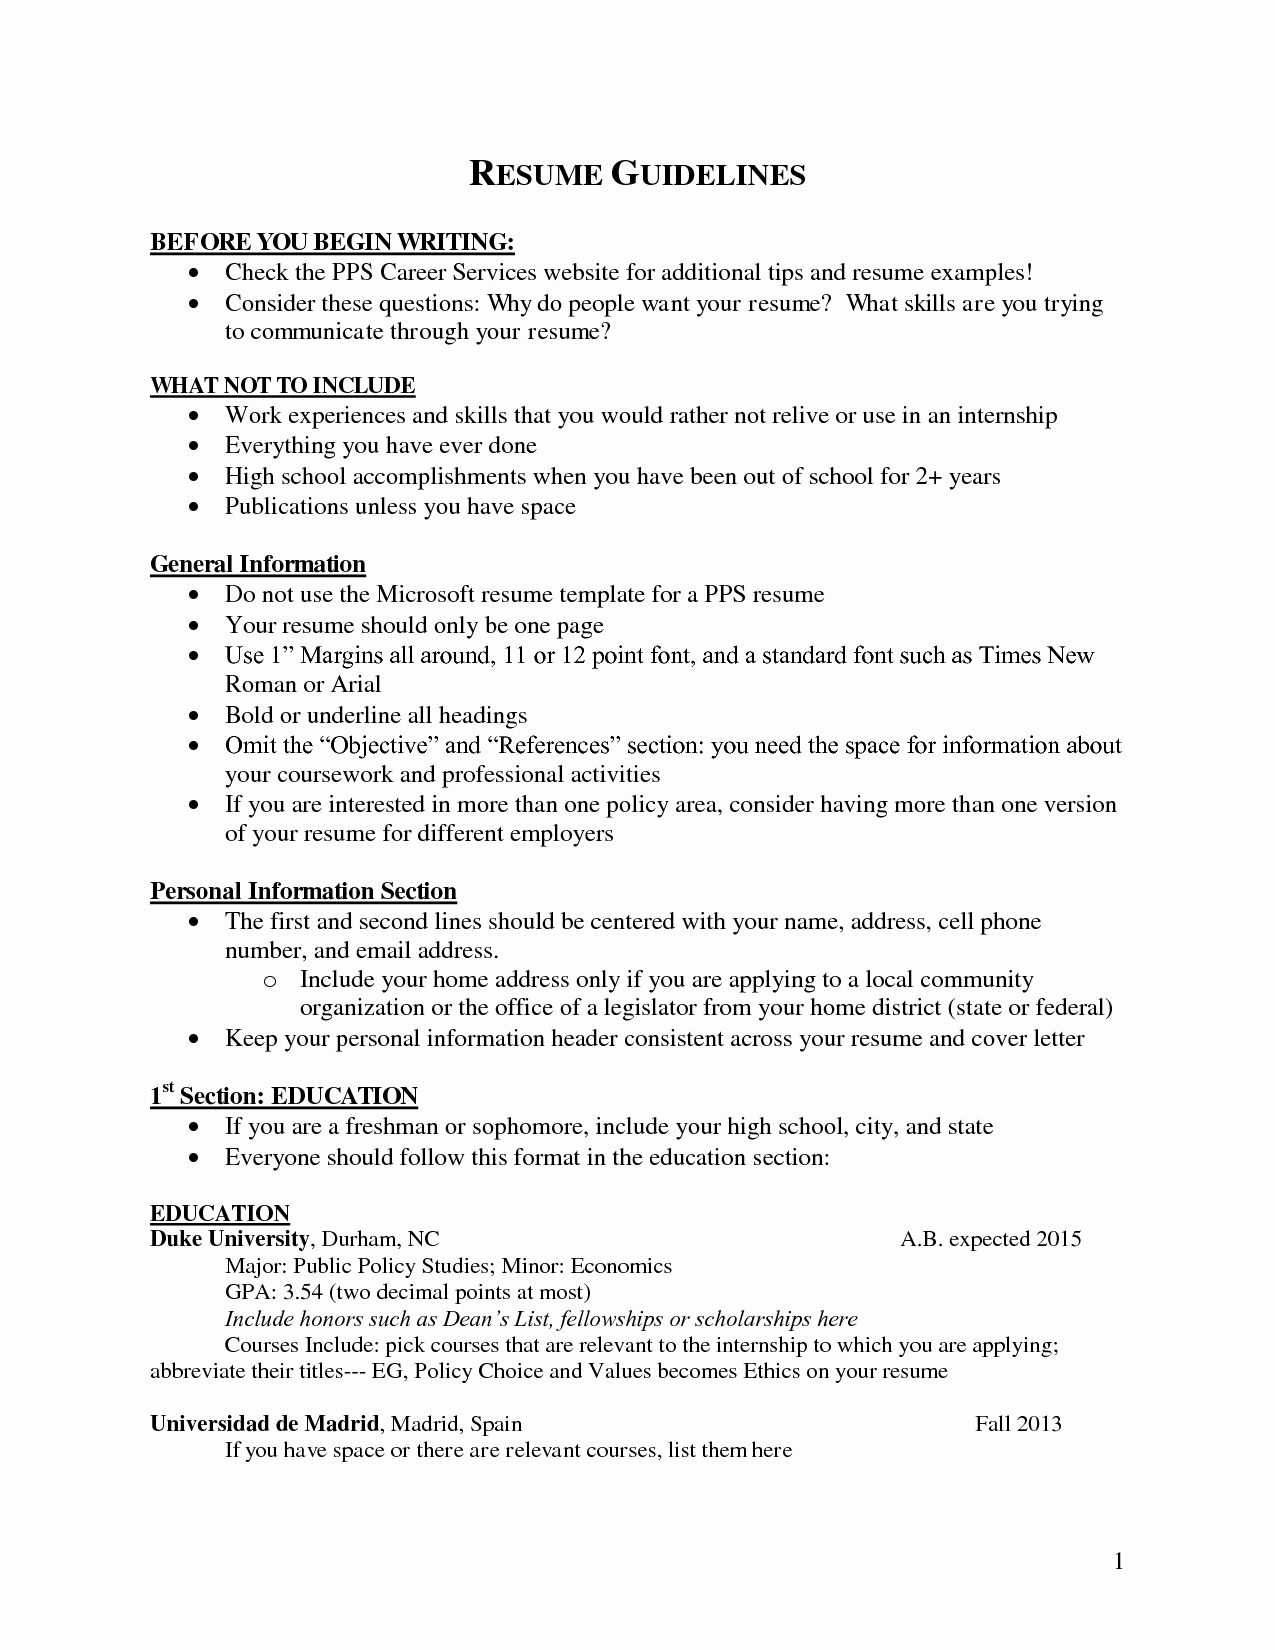 What Should Be the Key Skills In Resume Resume Ideas